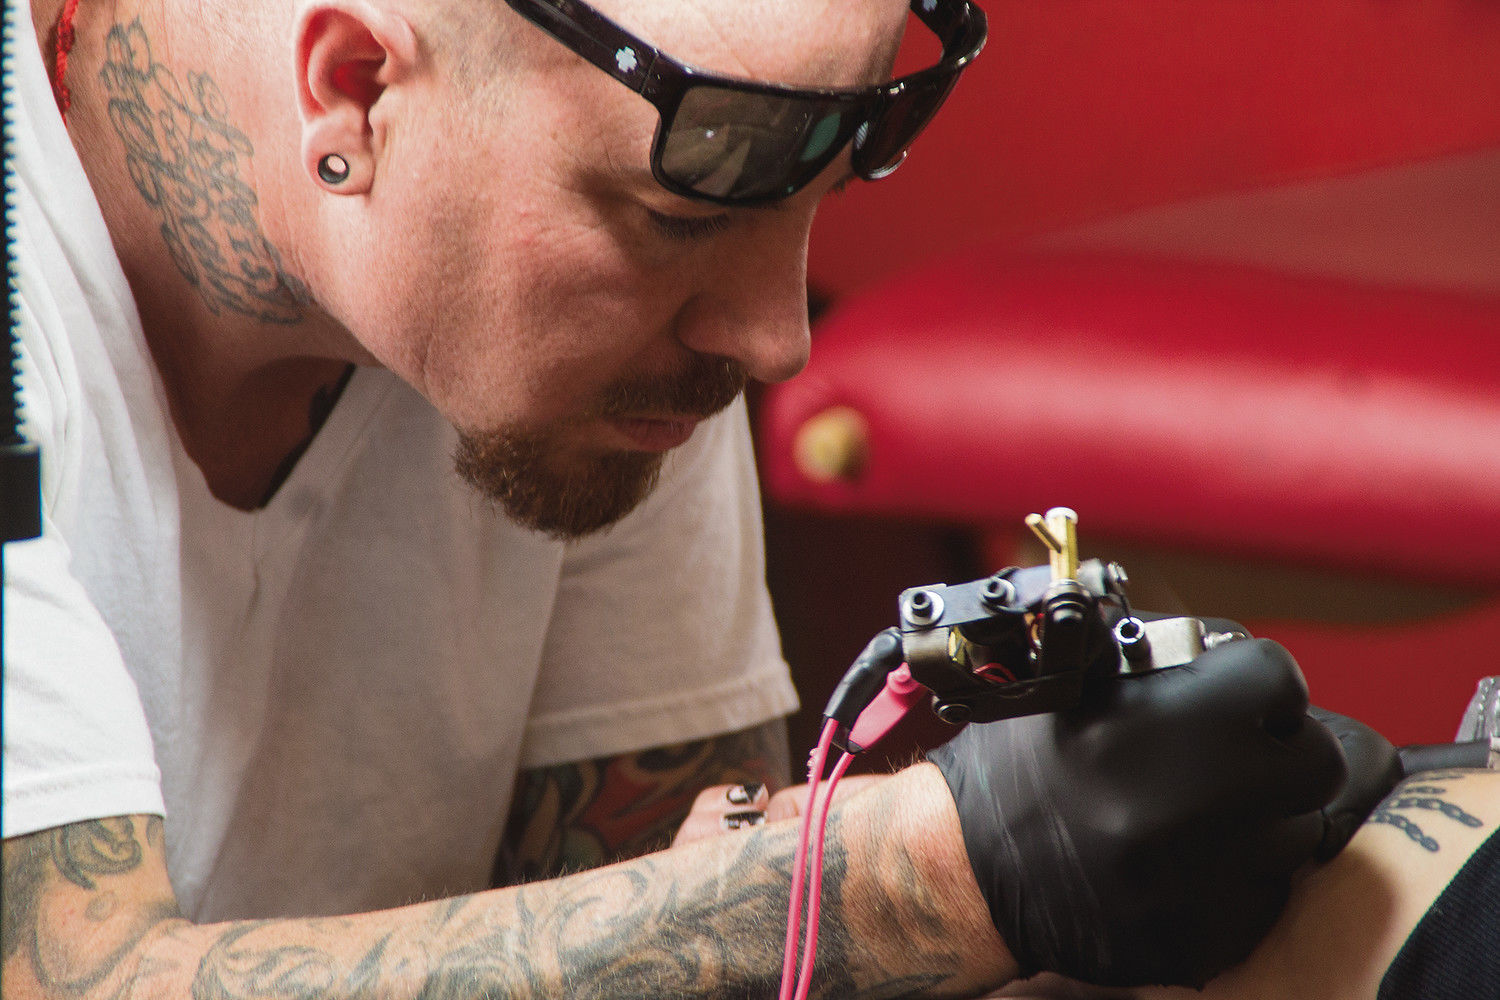 Meet the 22yearold who just opened Simsburys first tattoo shop   Hartford Courant